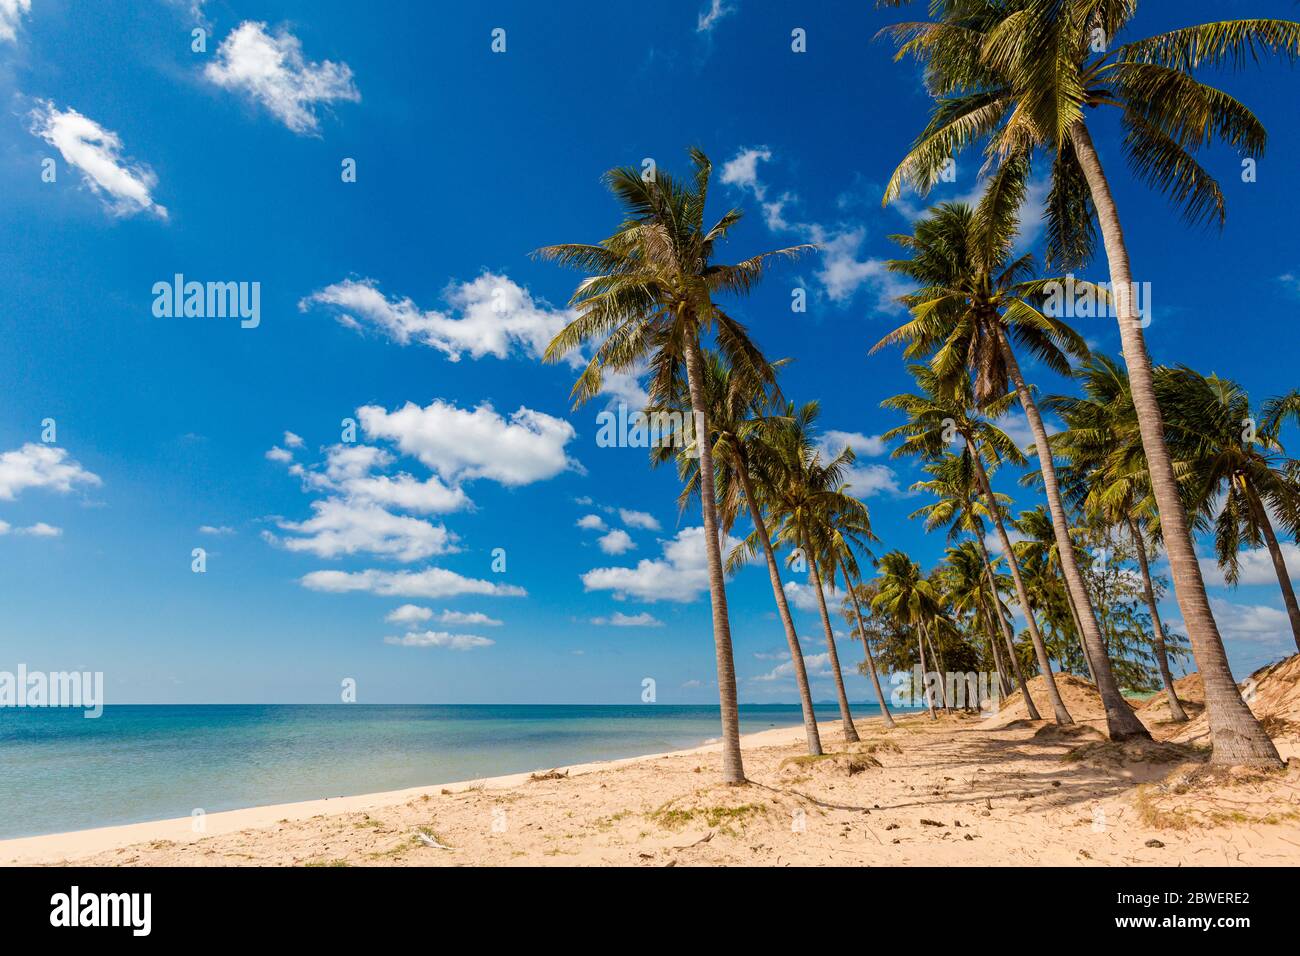 Local landscape in beautiful fishermans village Tran Hung Dao, tropical Phu Quoc island (An Thoi district) in Vietnam. Landscape taken during sunny da Stock Photo